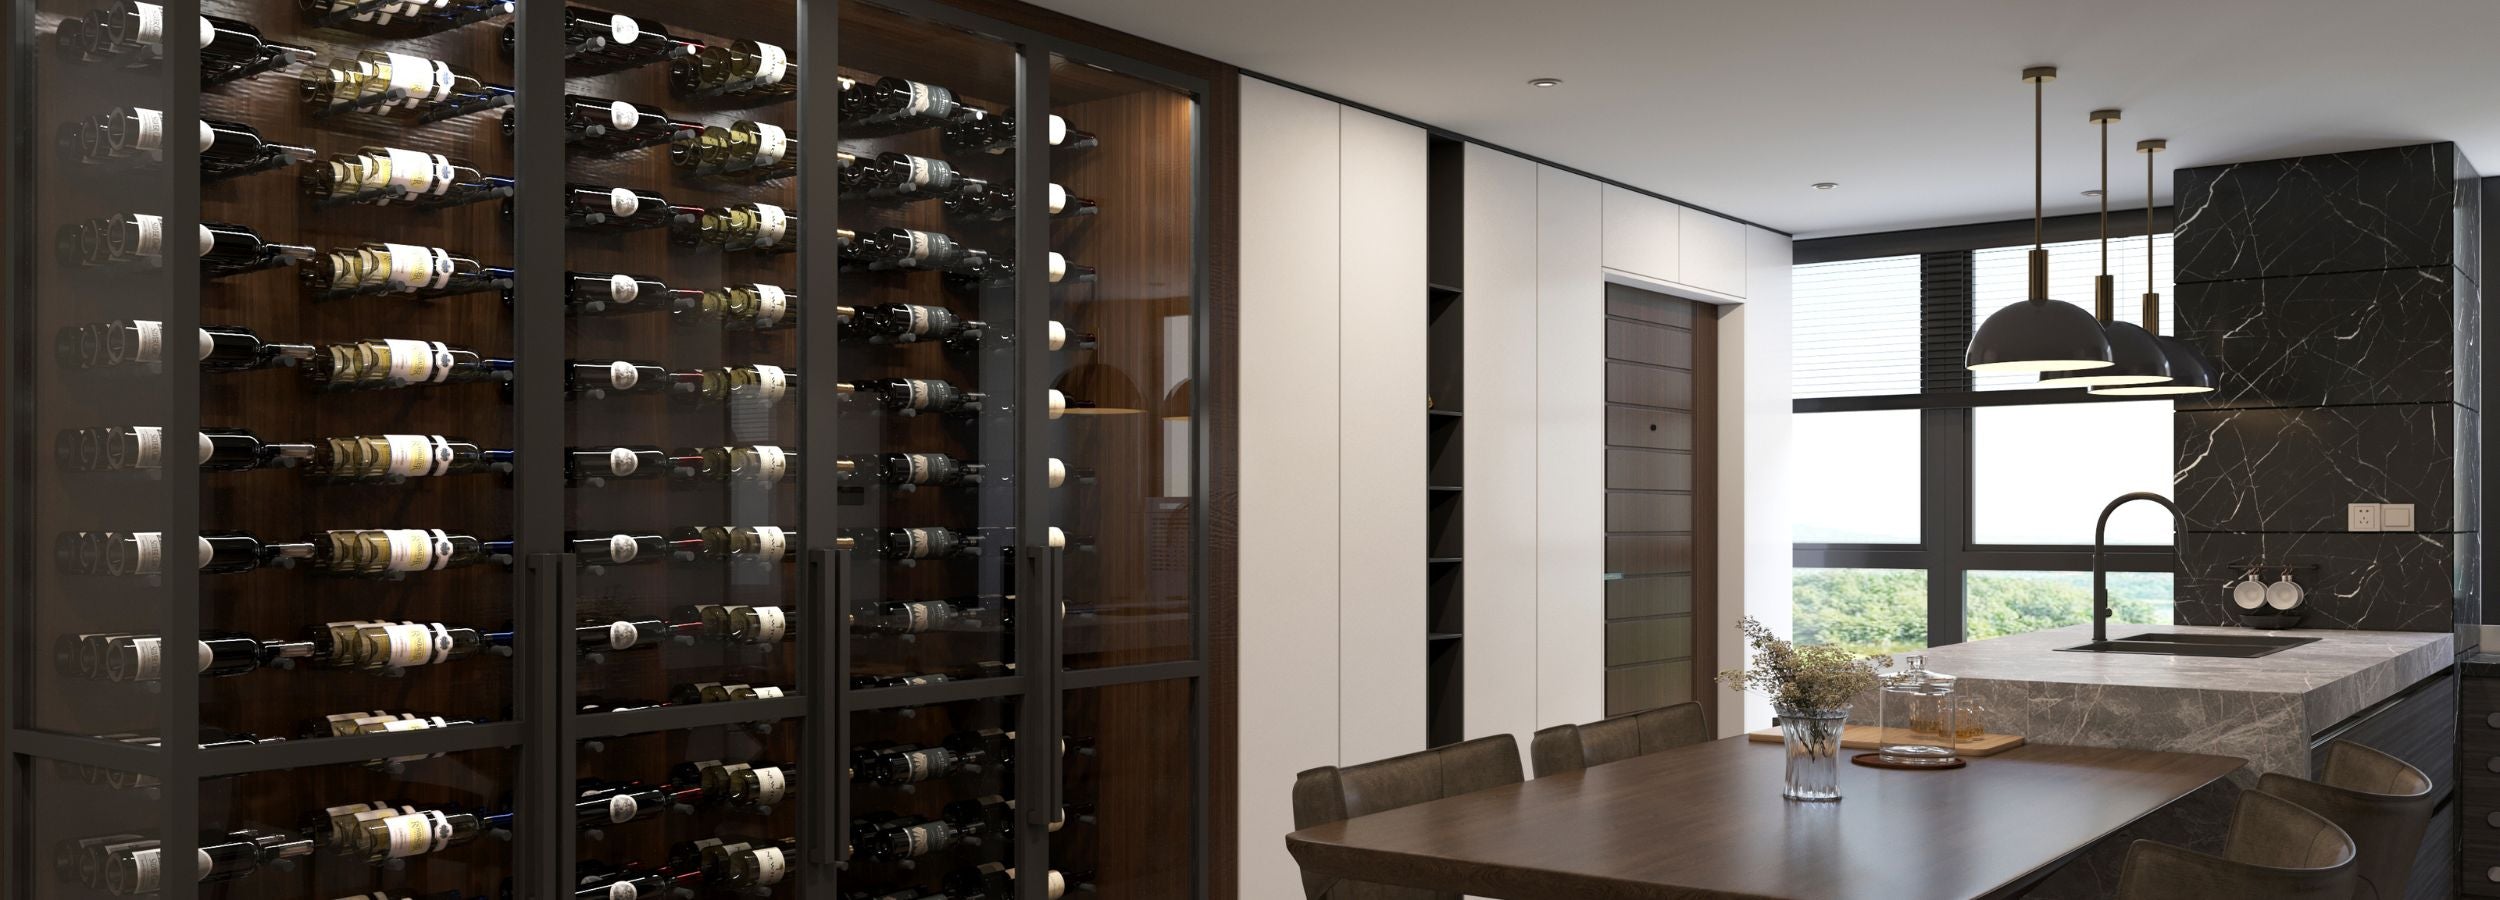 kitchen wine cellar with Whisperkool cooling unit - Genuwine Cellars Reserve